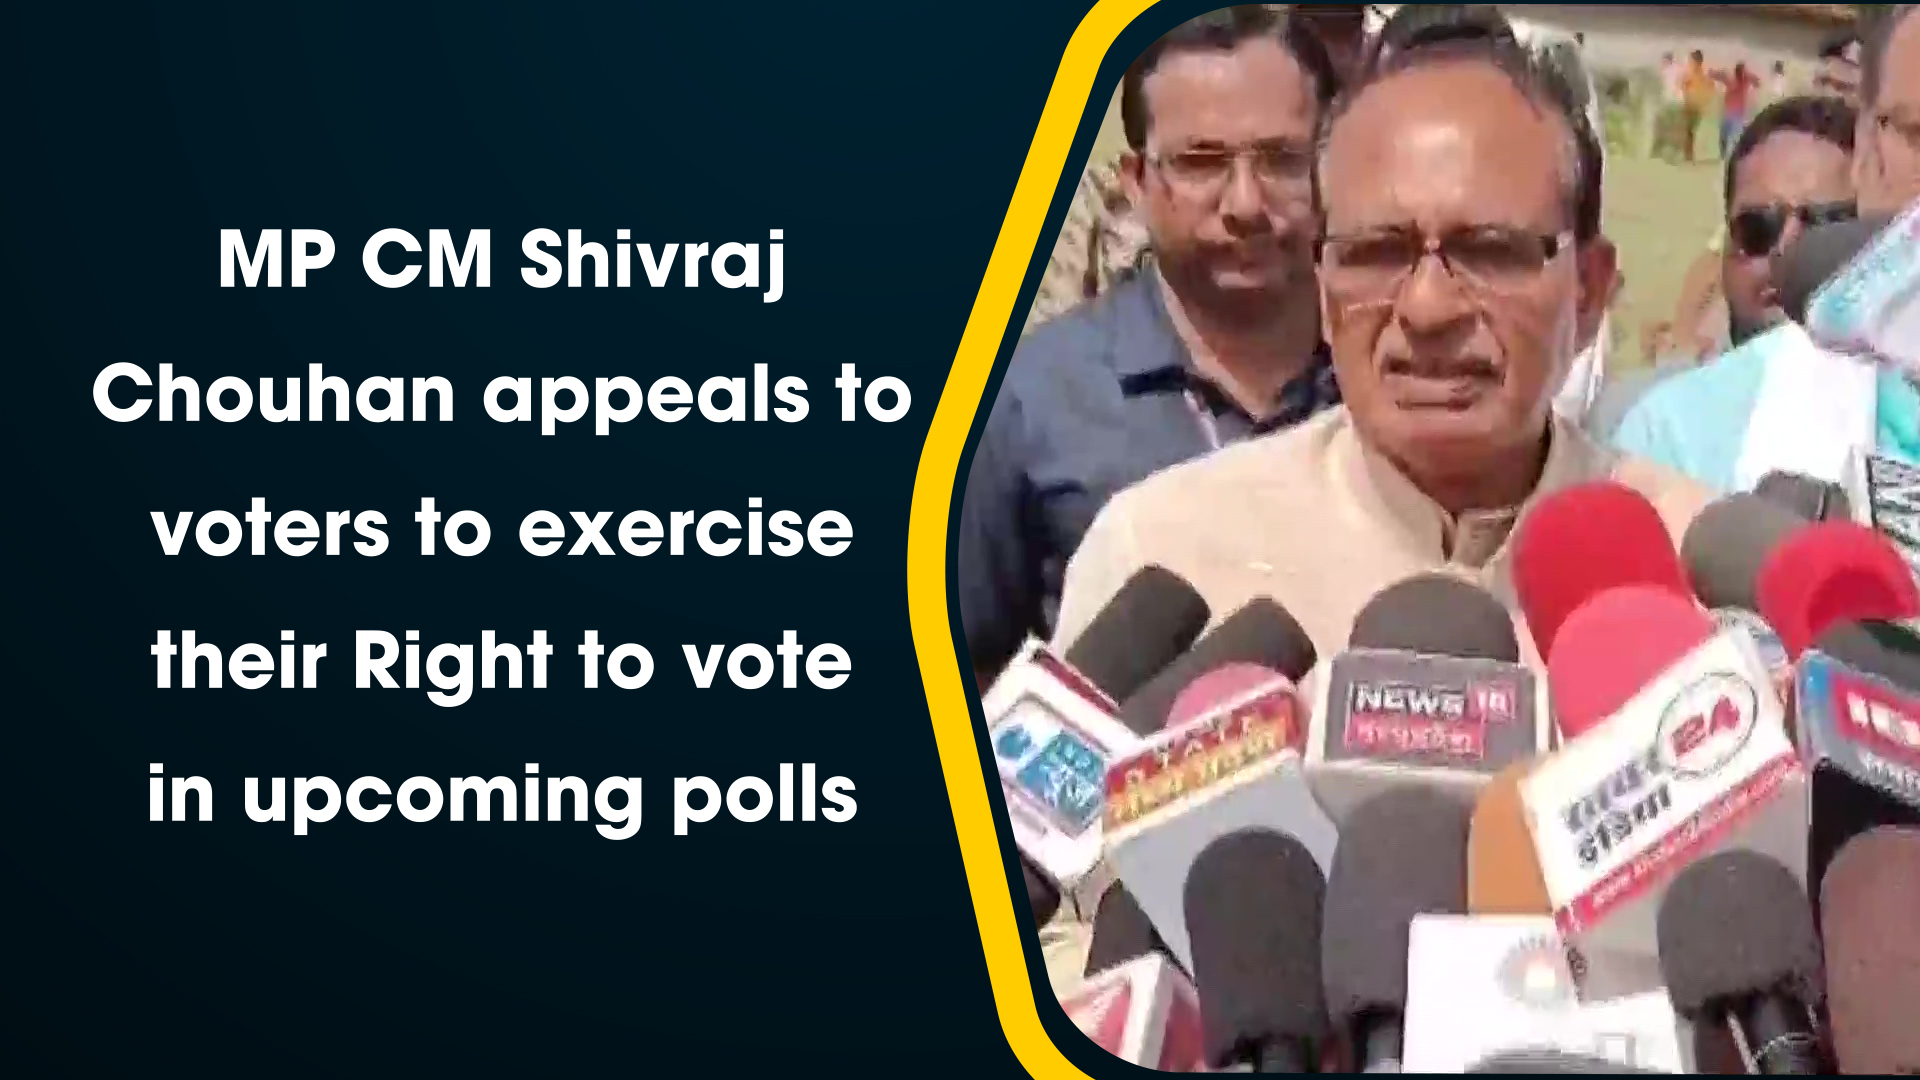 MP CM Shivraj Chouhan appeals to voters to exercise their Right to vote in upcoming polls